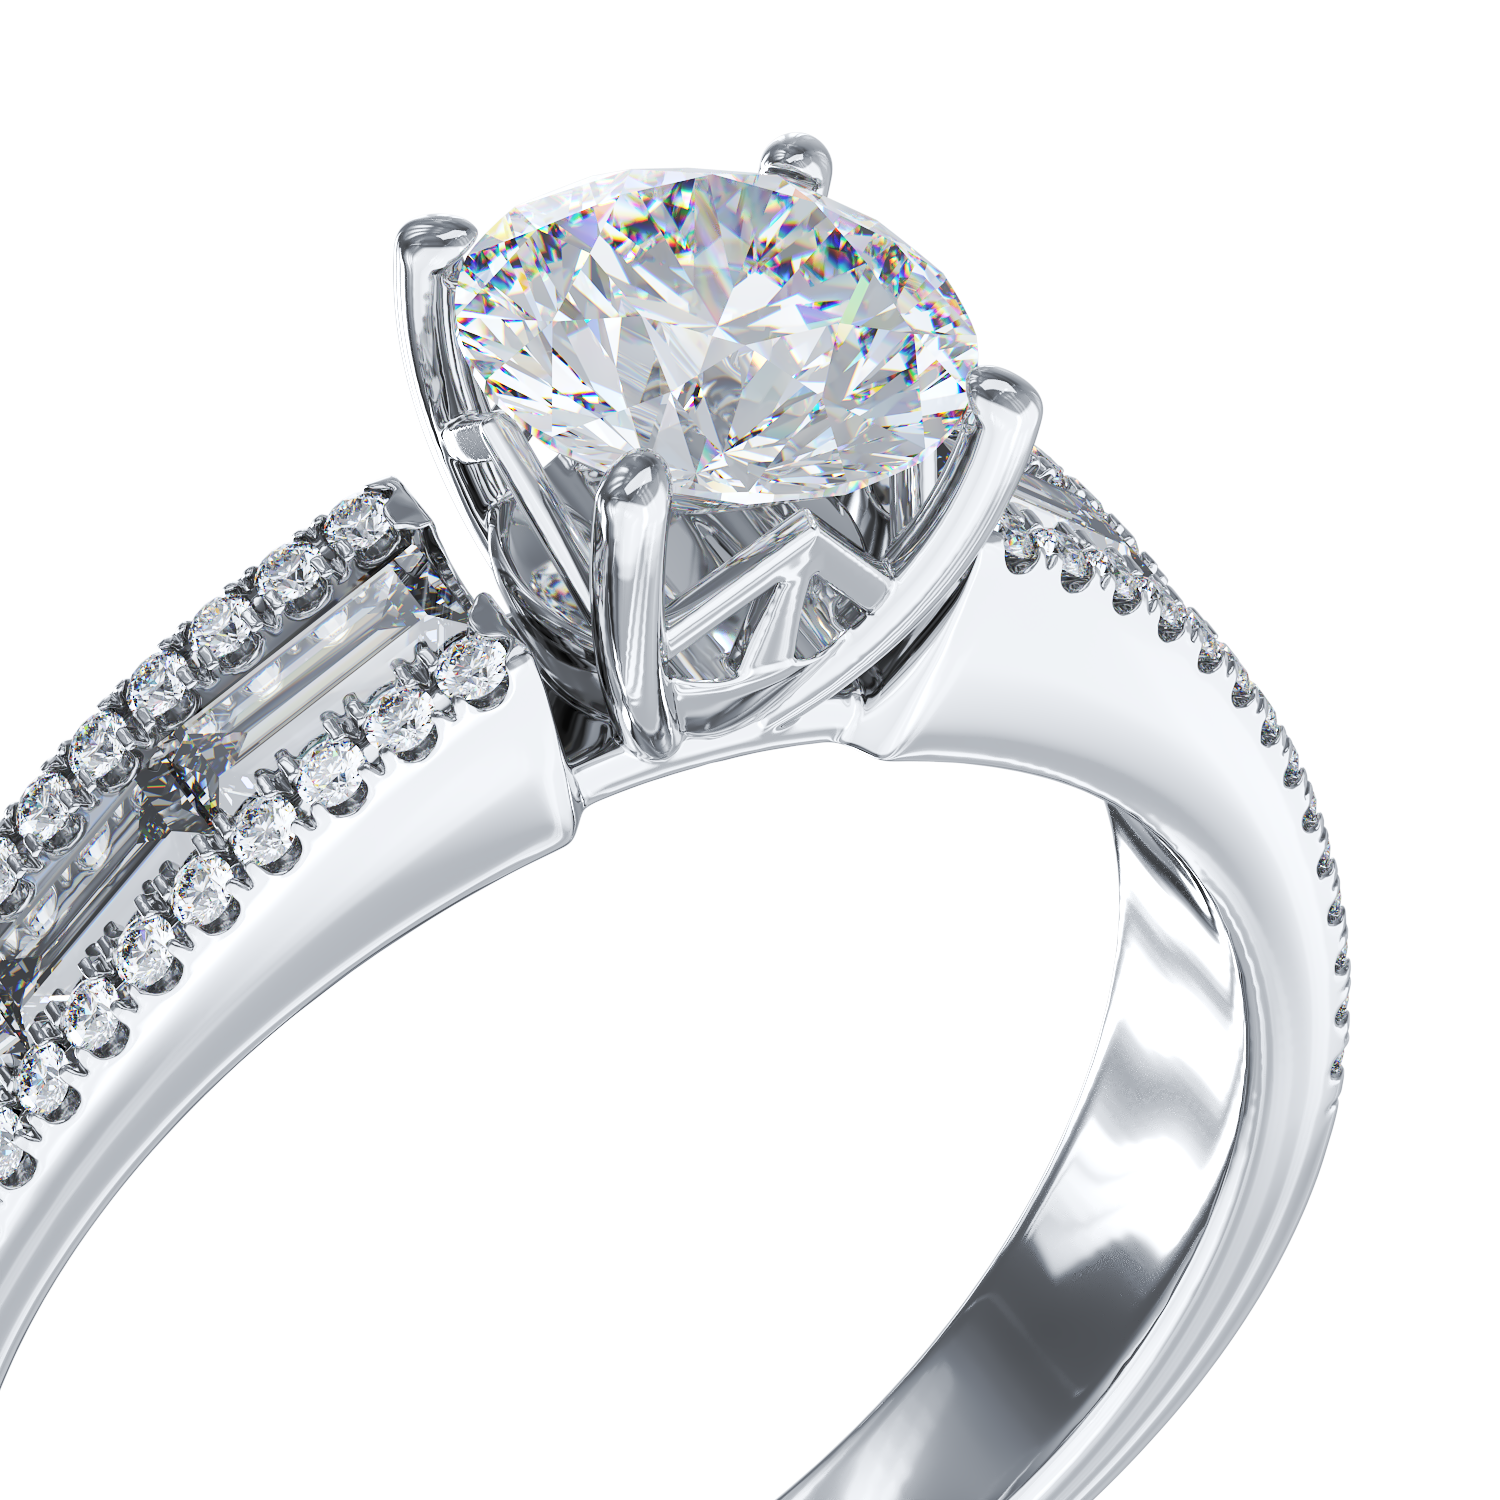 White gold engagement ring with 1.38ct diamonds